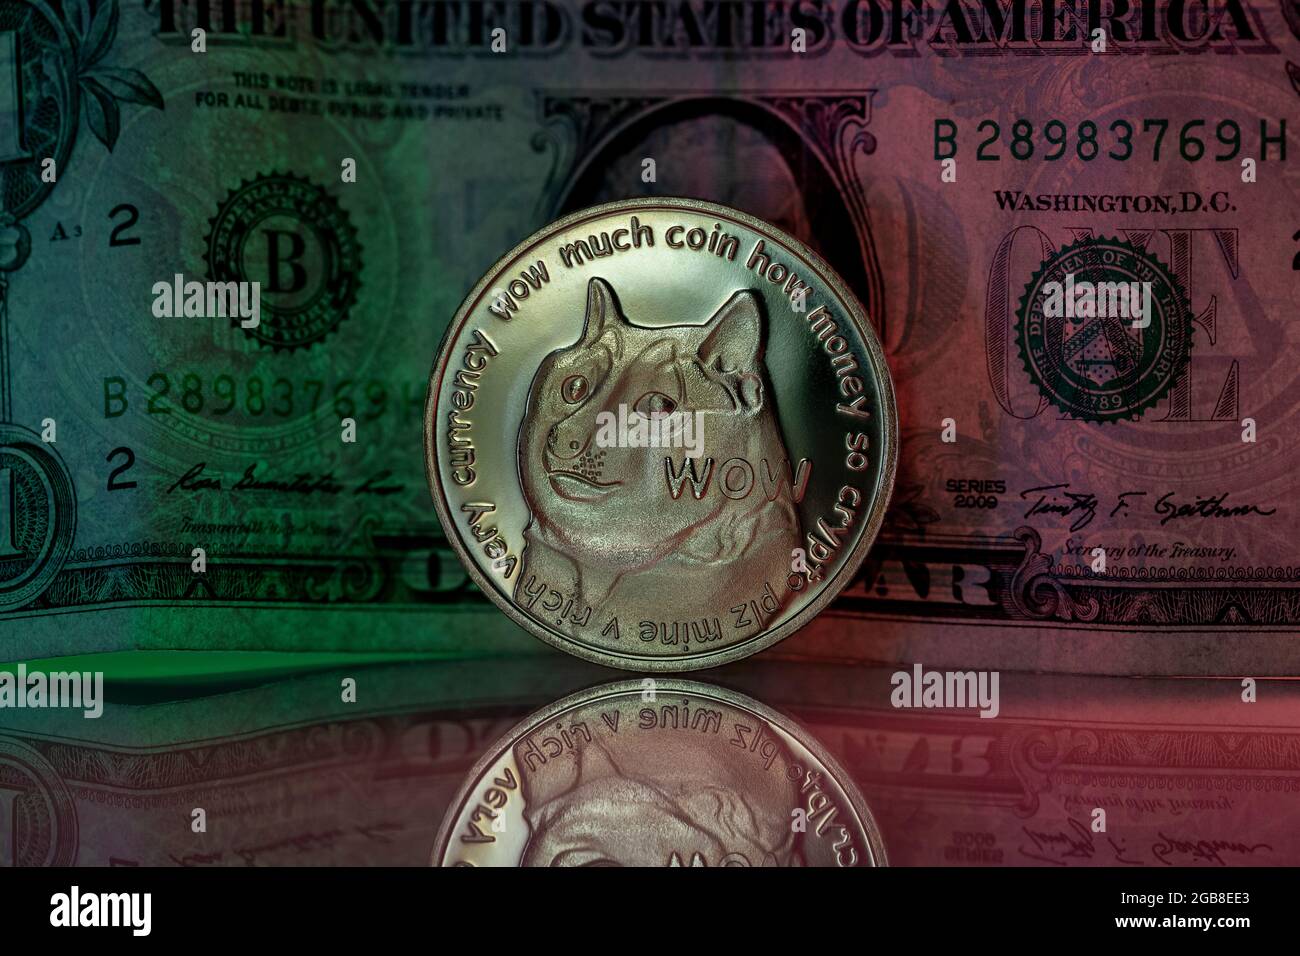 Doge cryptocurrency physical coin placed next to US dollar in the dark background and lit with green and red lights Stock Photo